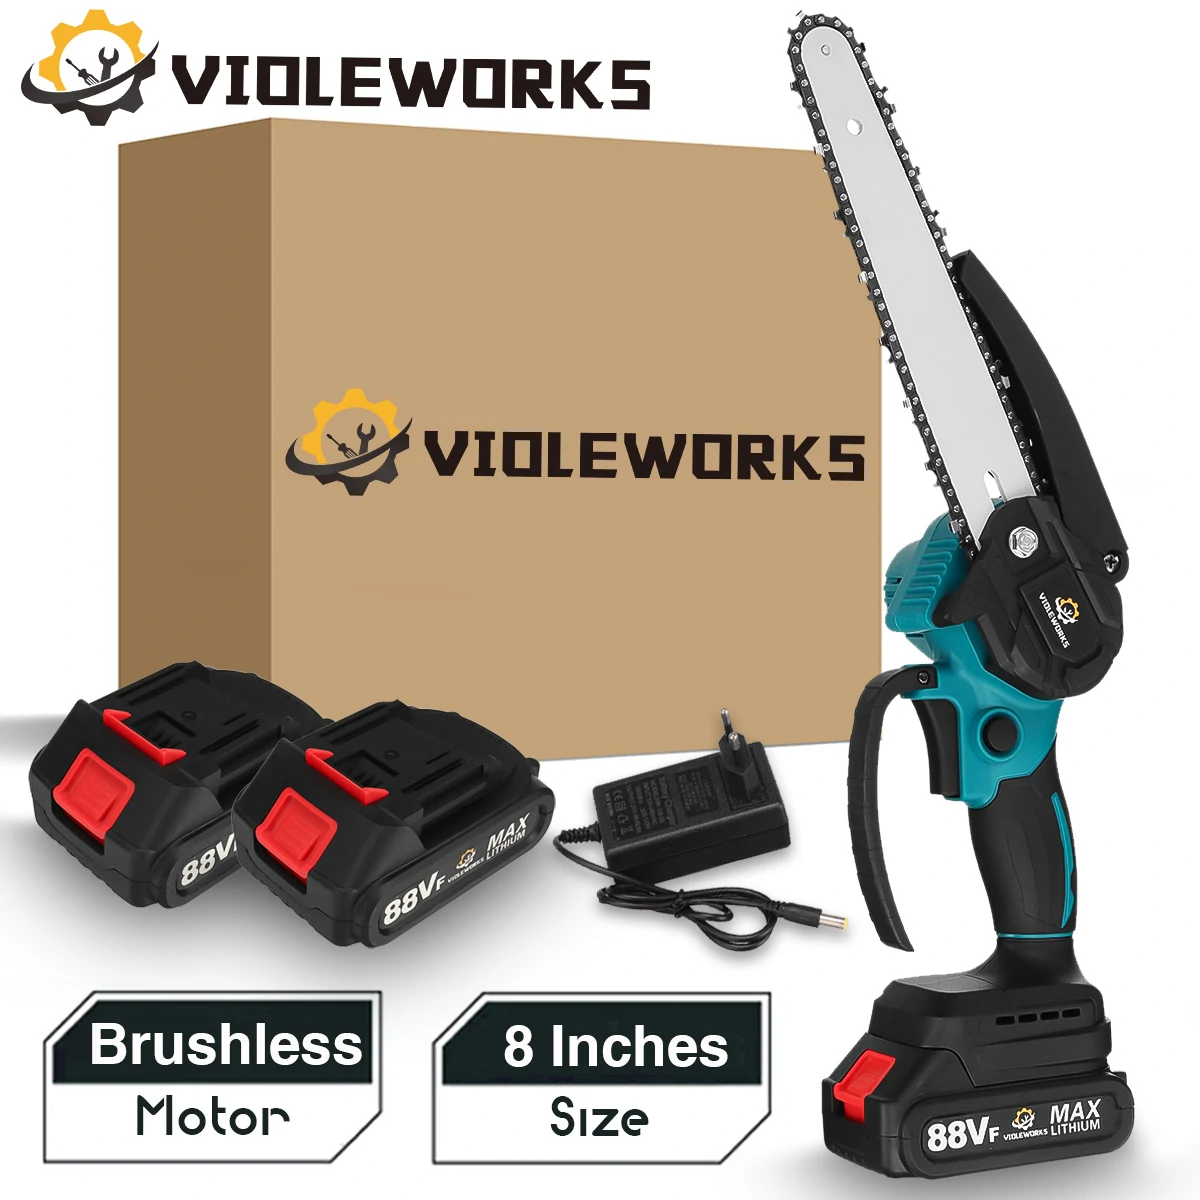 VIOLEWORKS 8-inch chainsaw with two batteries for 15 thousand